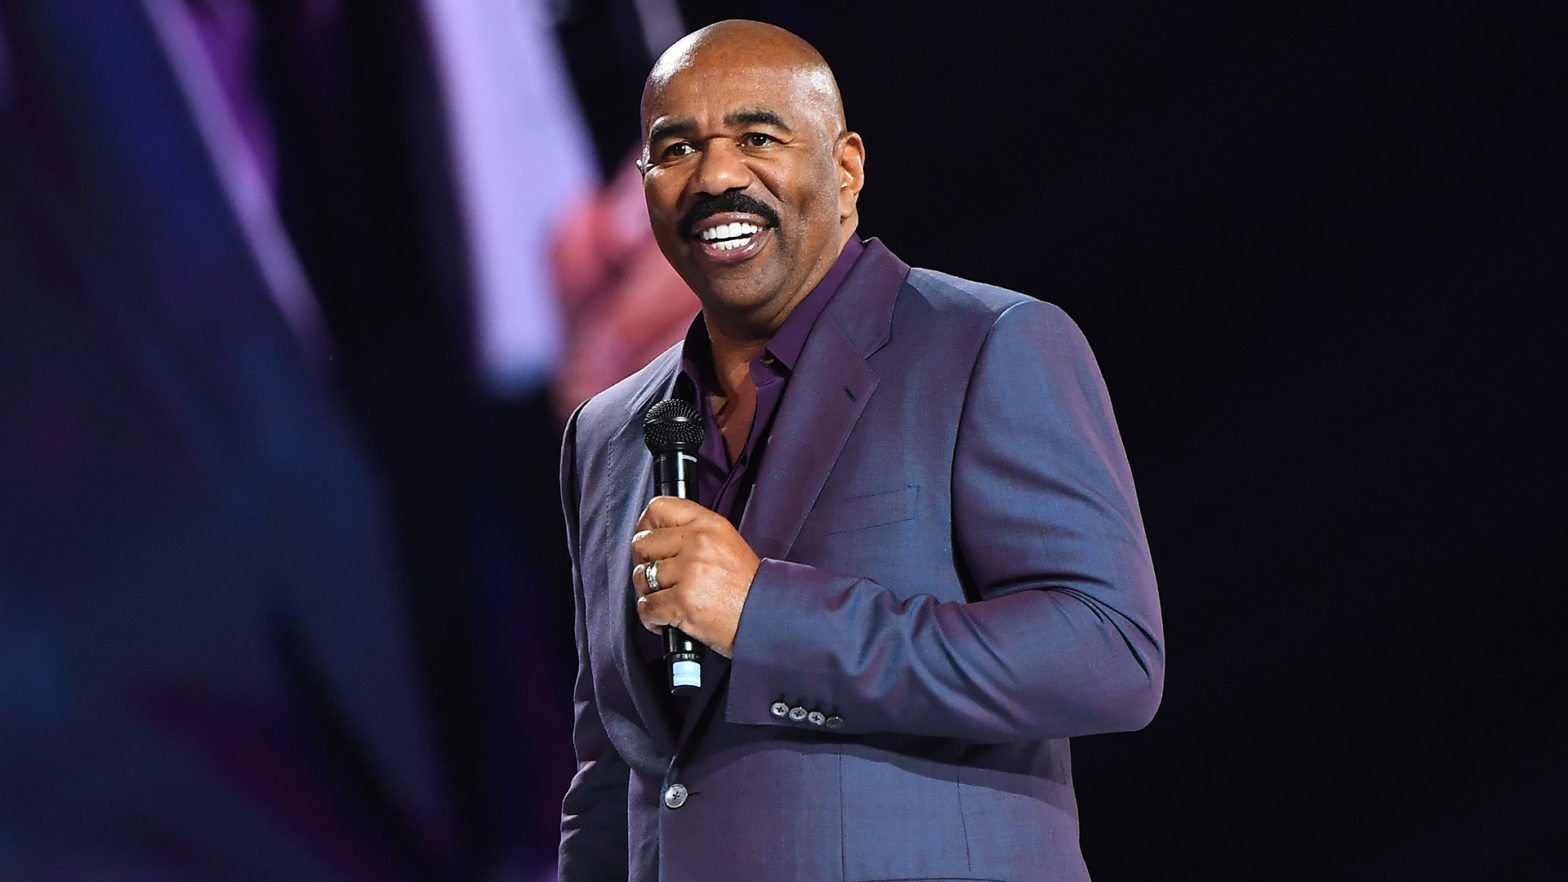 Solana NFT Reportedly 'Hit An All-Time High Price' After Steve Harvey Changed His Twitter Avi